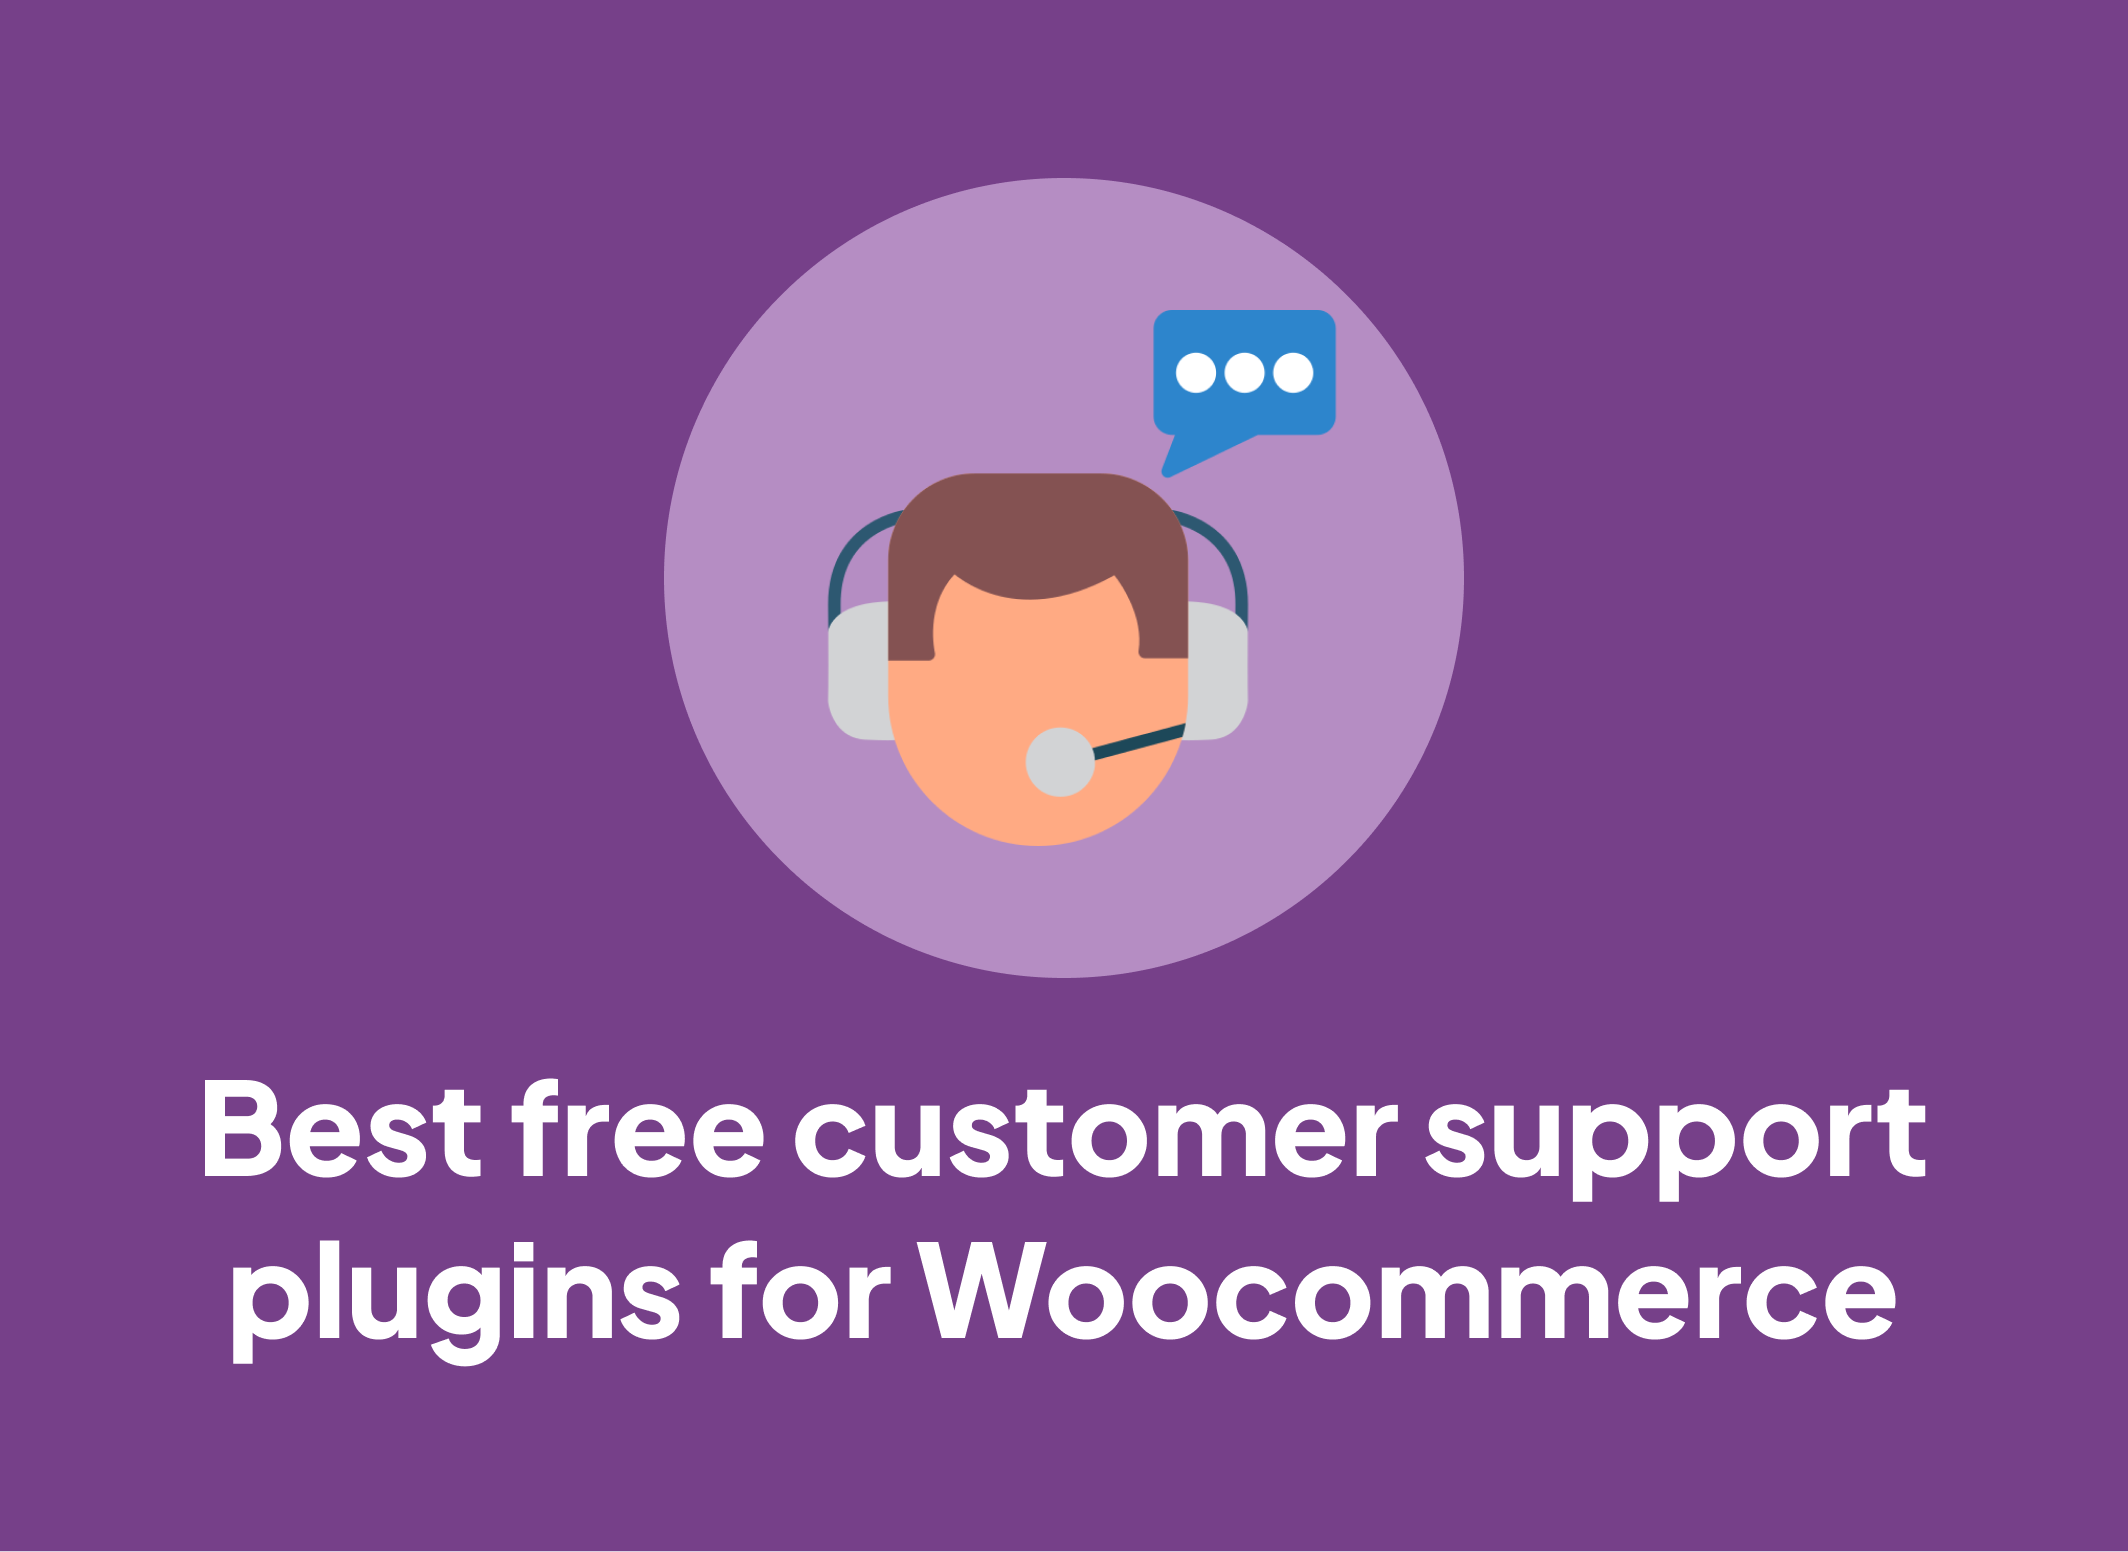 Top 5 Free Customer Support Tools for WooCommerce Shop Owners